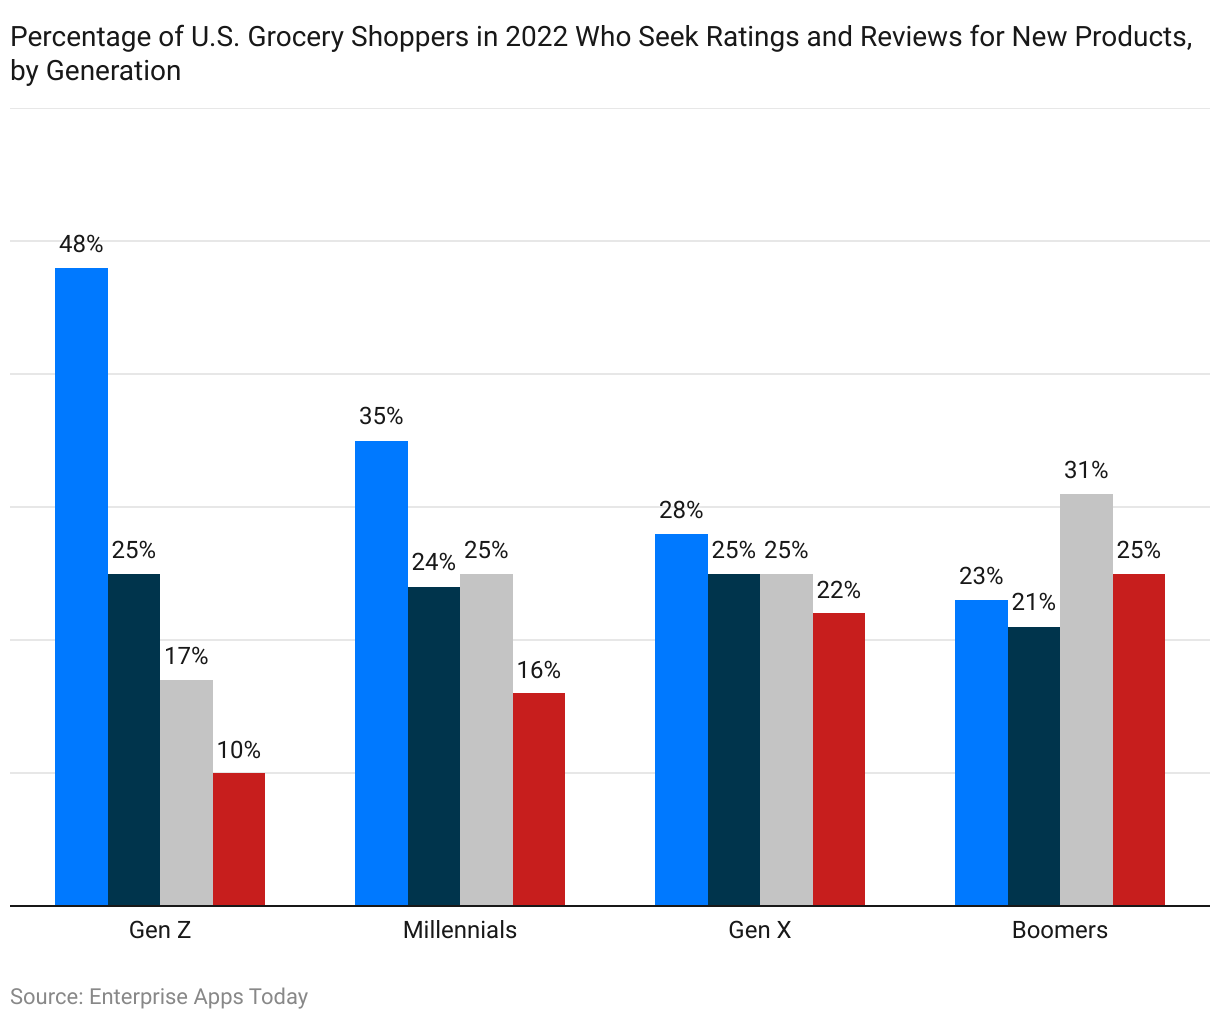 Percentage of U.S. Grocery Shoppers in 2022 Who Seek Ratings and Reviews for New Products, by Generation 